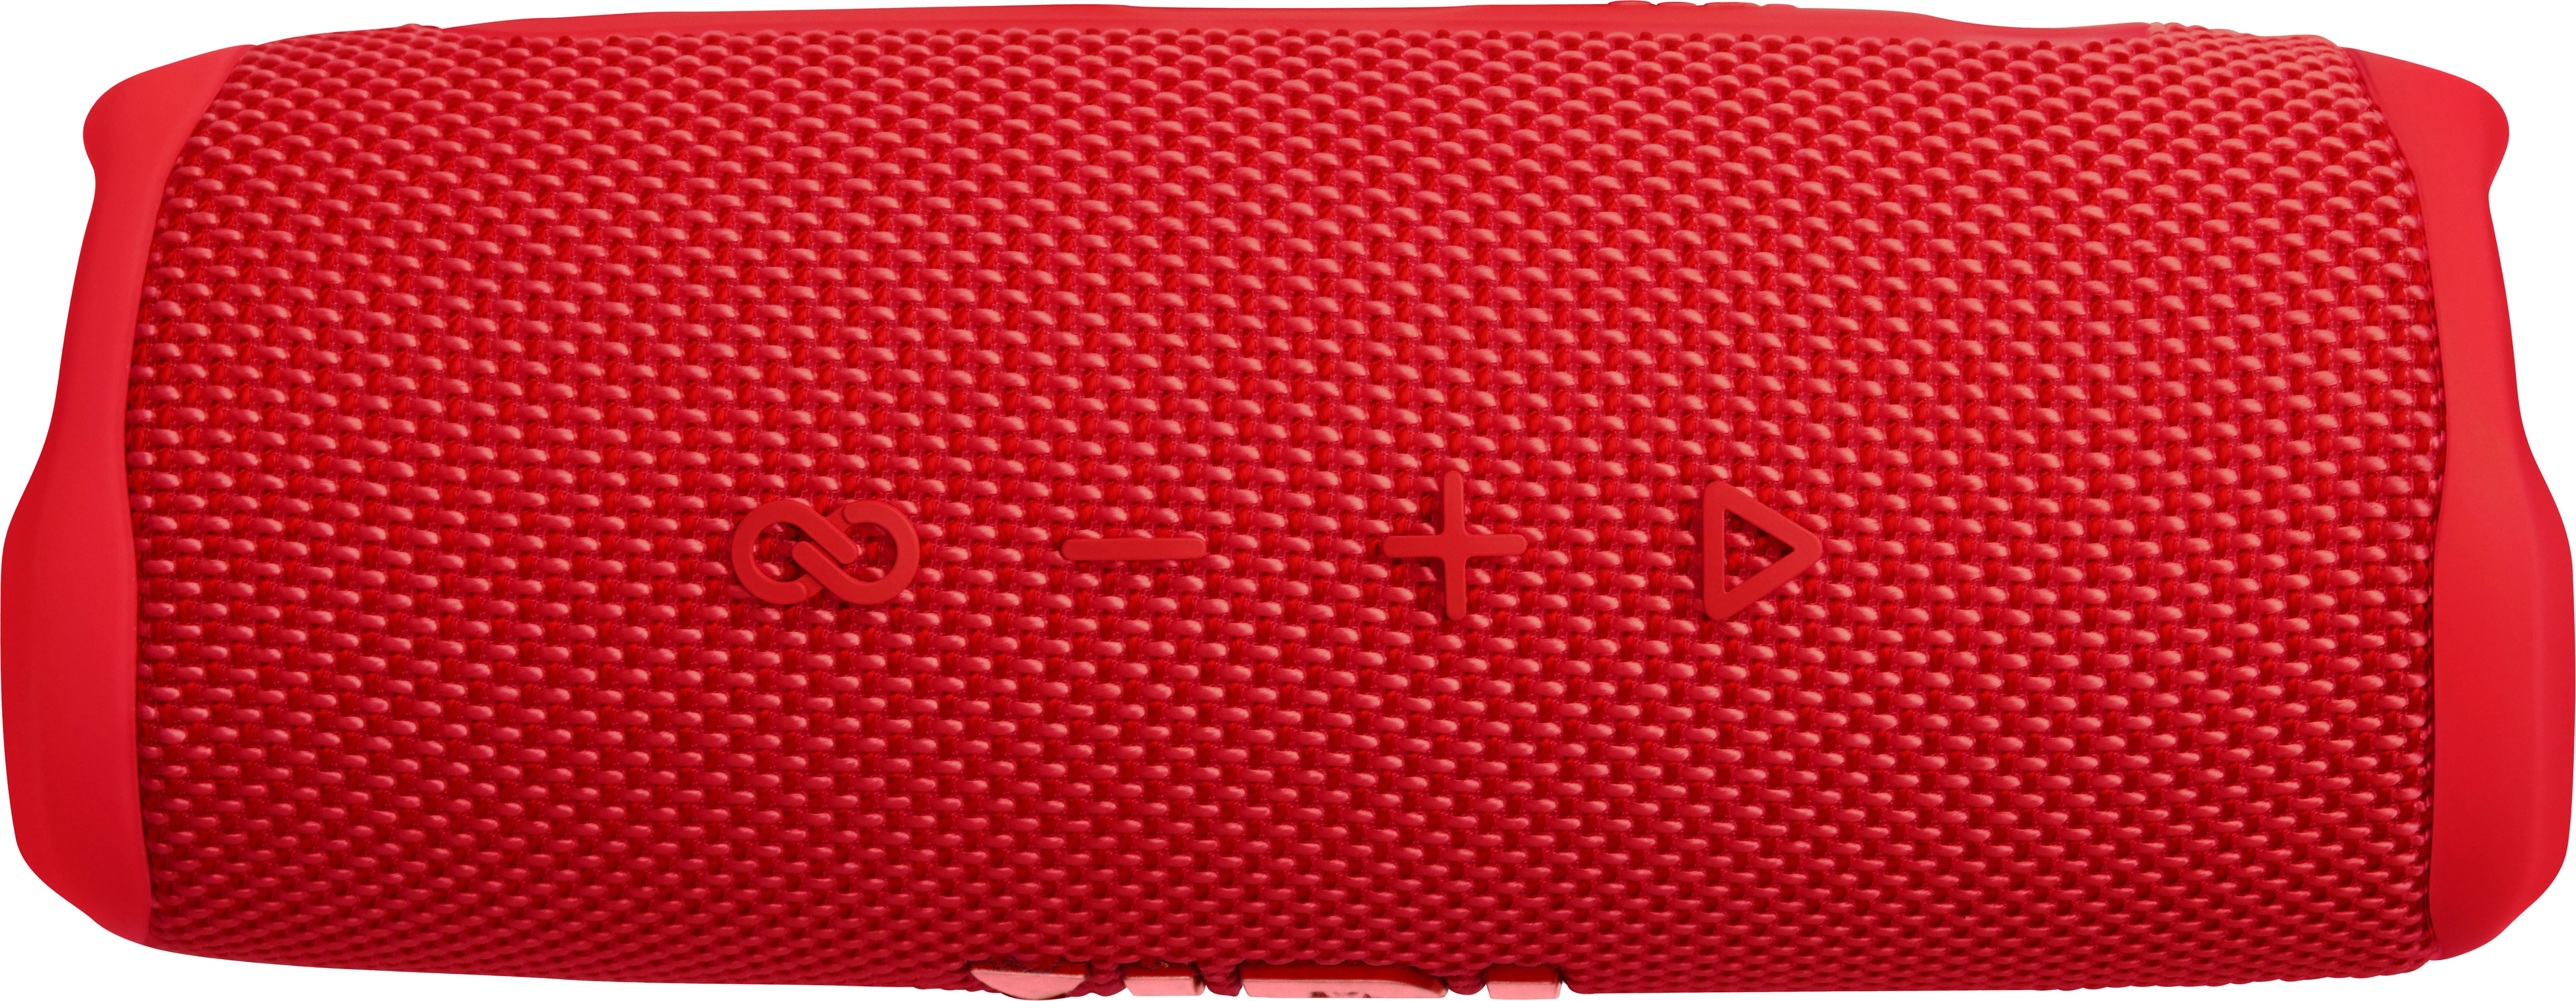  JBL Flip 6 - Portable Bluetooth Speaker, Powerful Sound and  deep bass, IPX7 Waterproof, 12 Hours of Playtime- Red (Renewed) :  Electronics